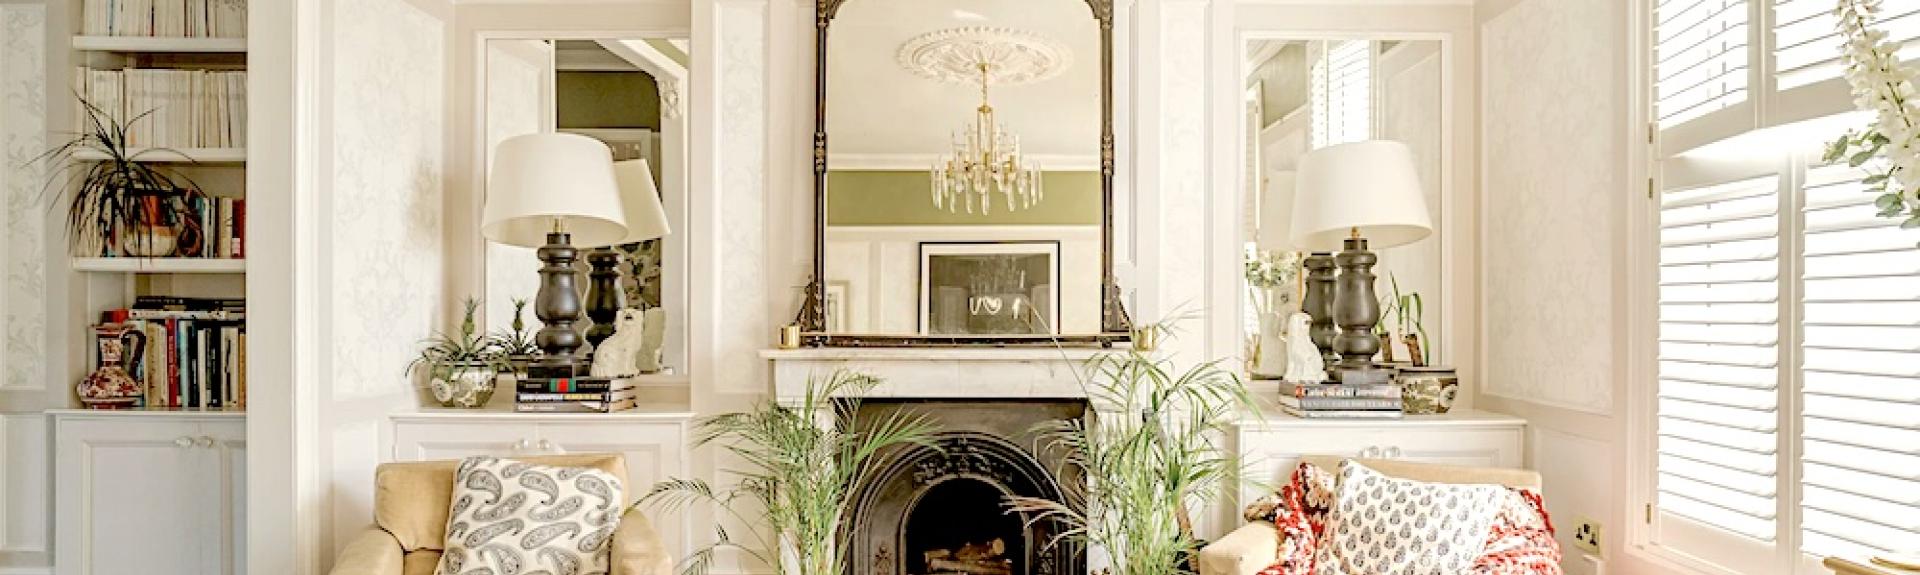 A lounge with a feature fireplace between two armchairs.